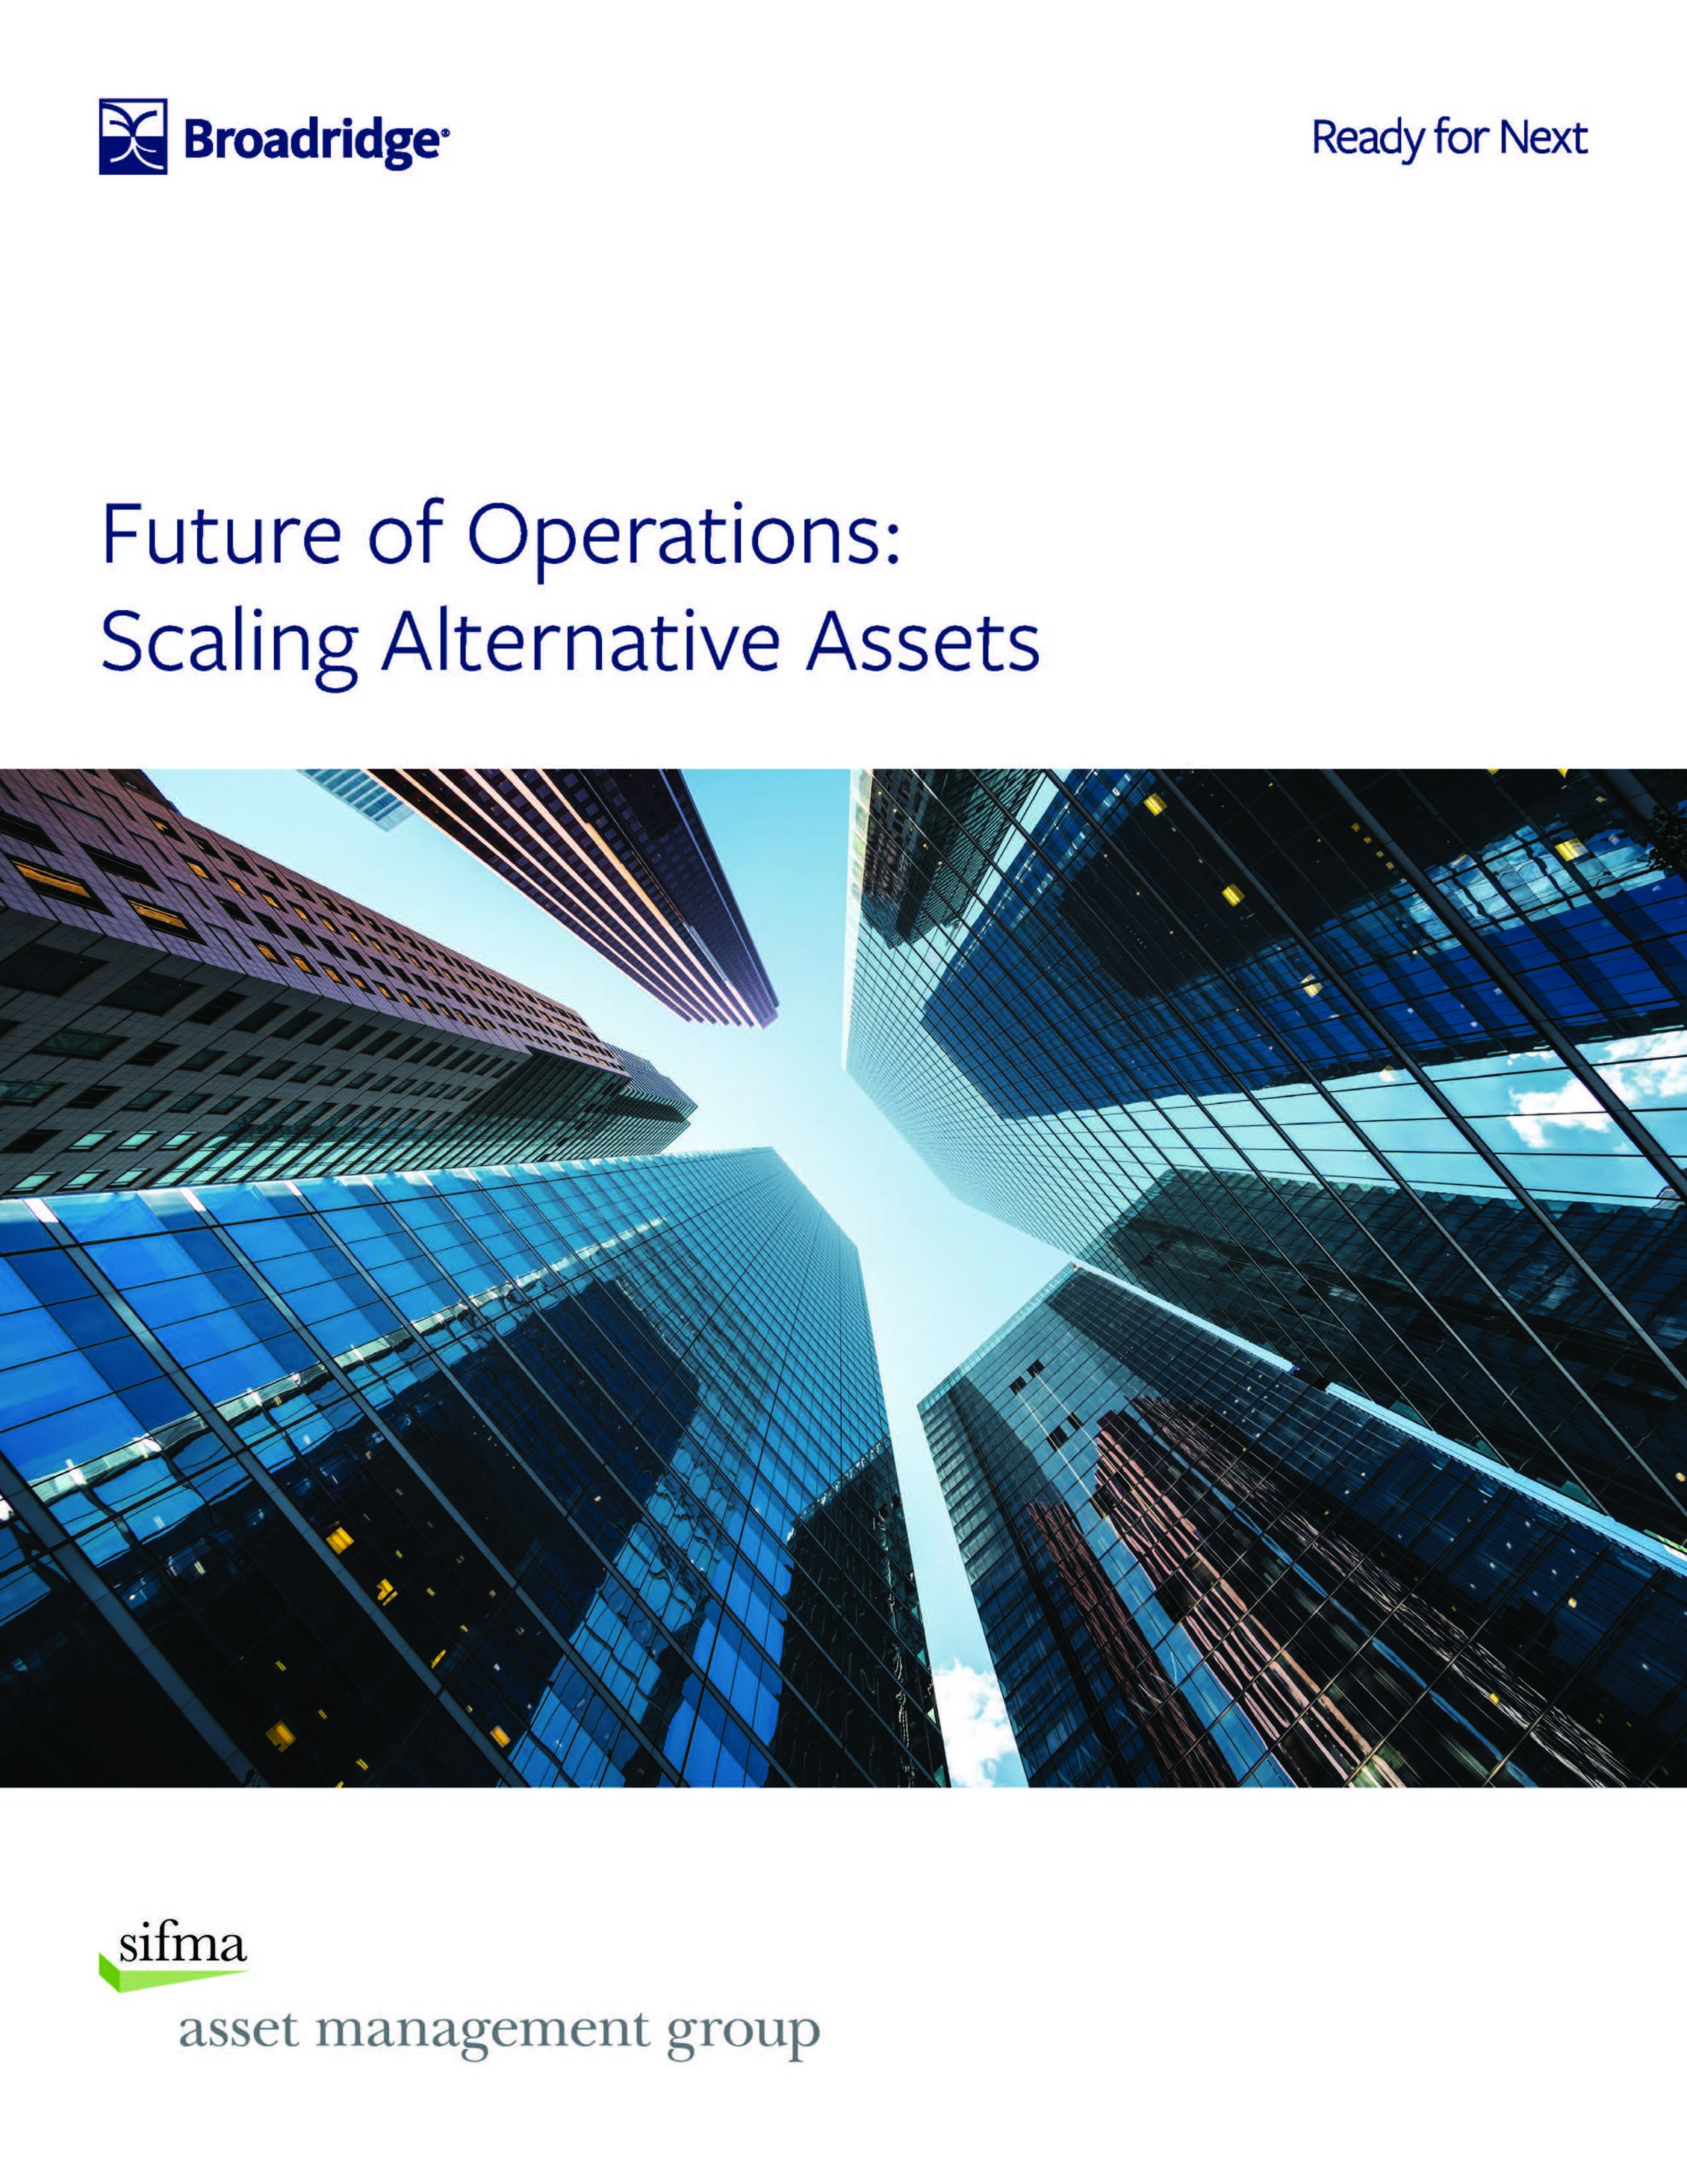 Future of Operations Scaling Alternative Assets - SIFMA AMG and Broadridge cover